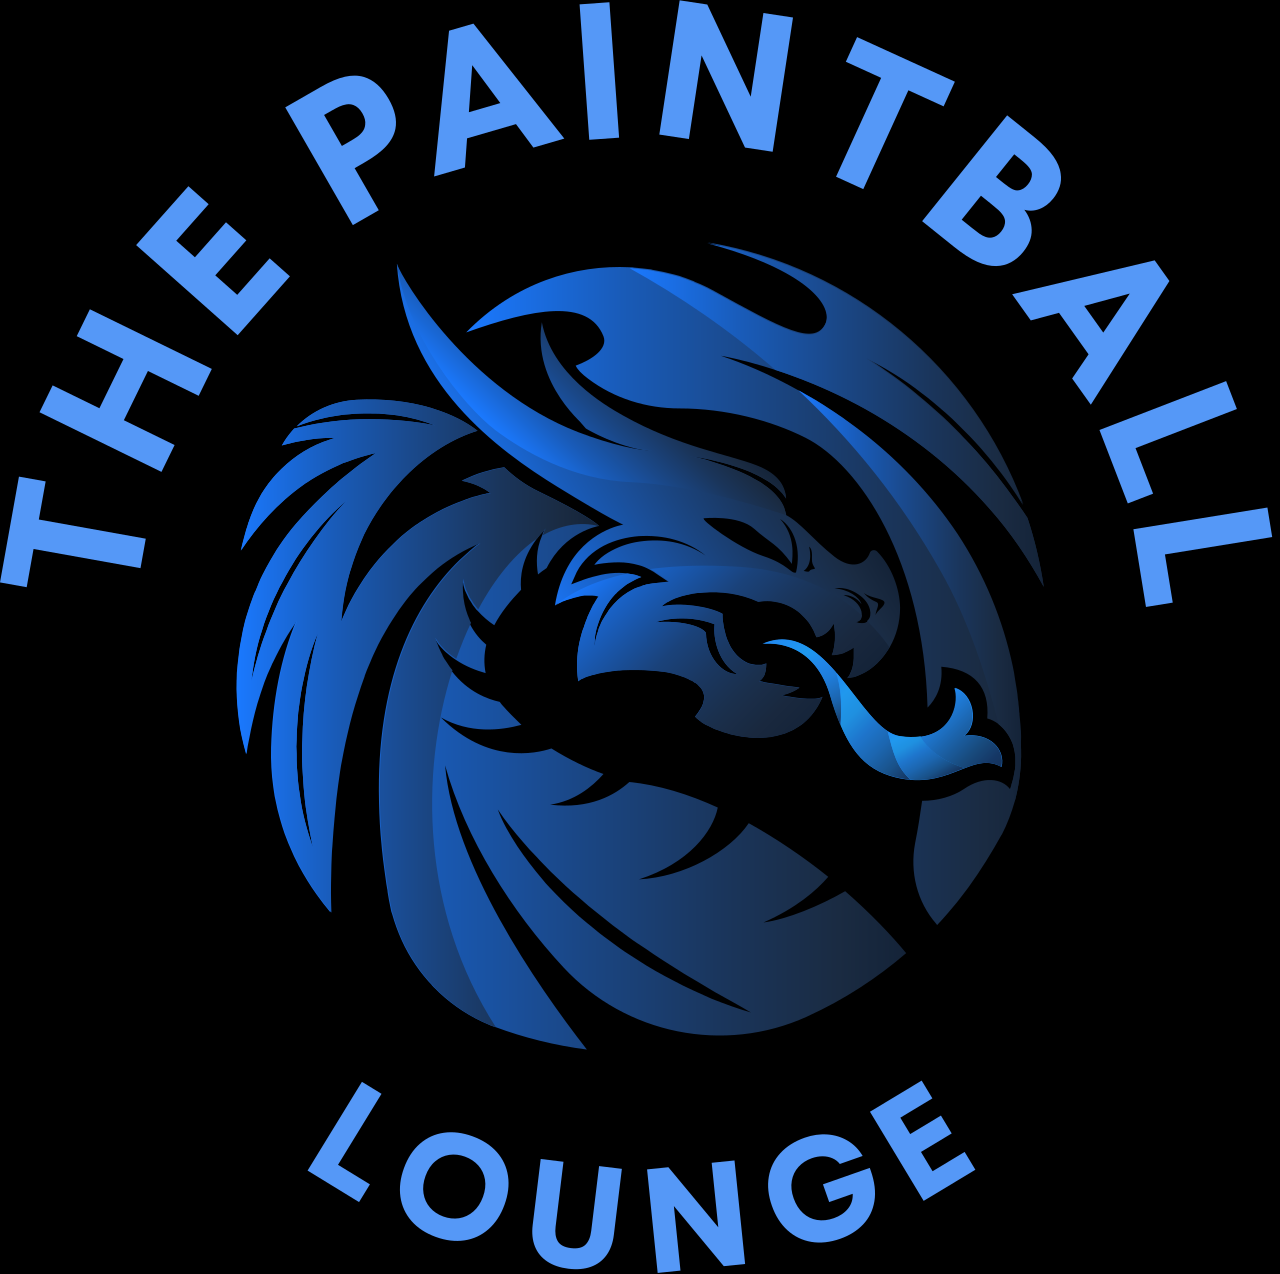 The Paintball Lounge 's web page